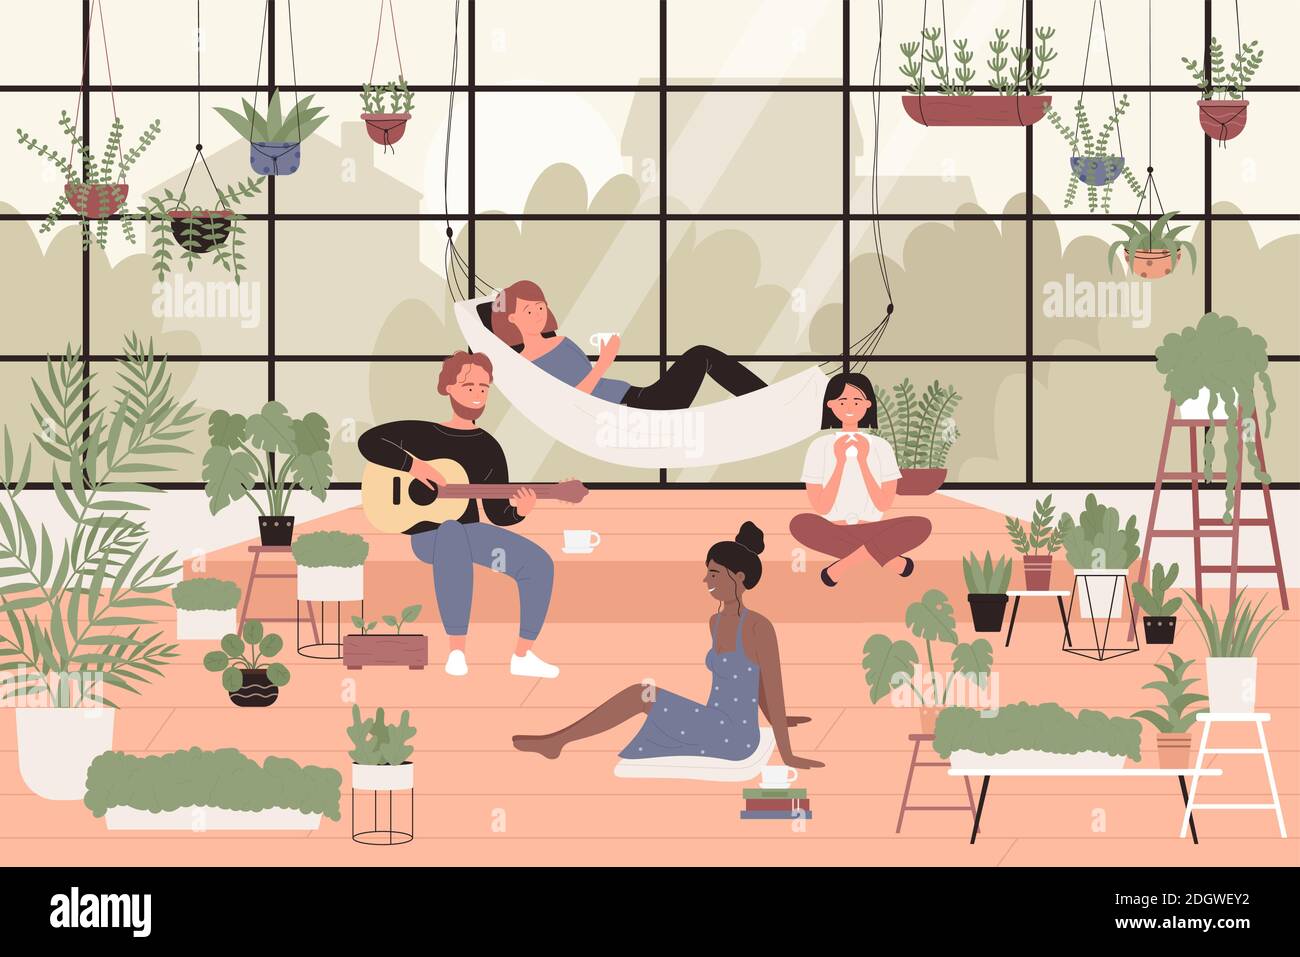 People in greenhouse home garden vector illustration. Cartoon young man woman friends characters spend time together in green house interior with potted houseplants in pots, botanical hobby background Stock Vector